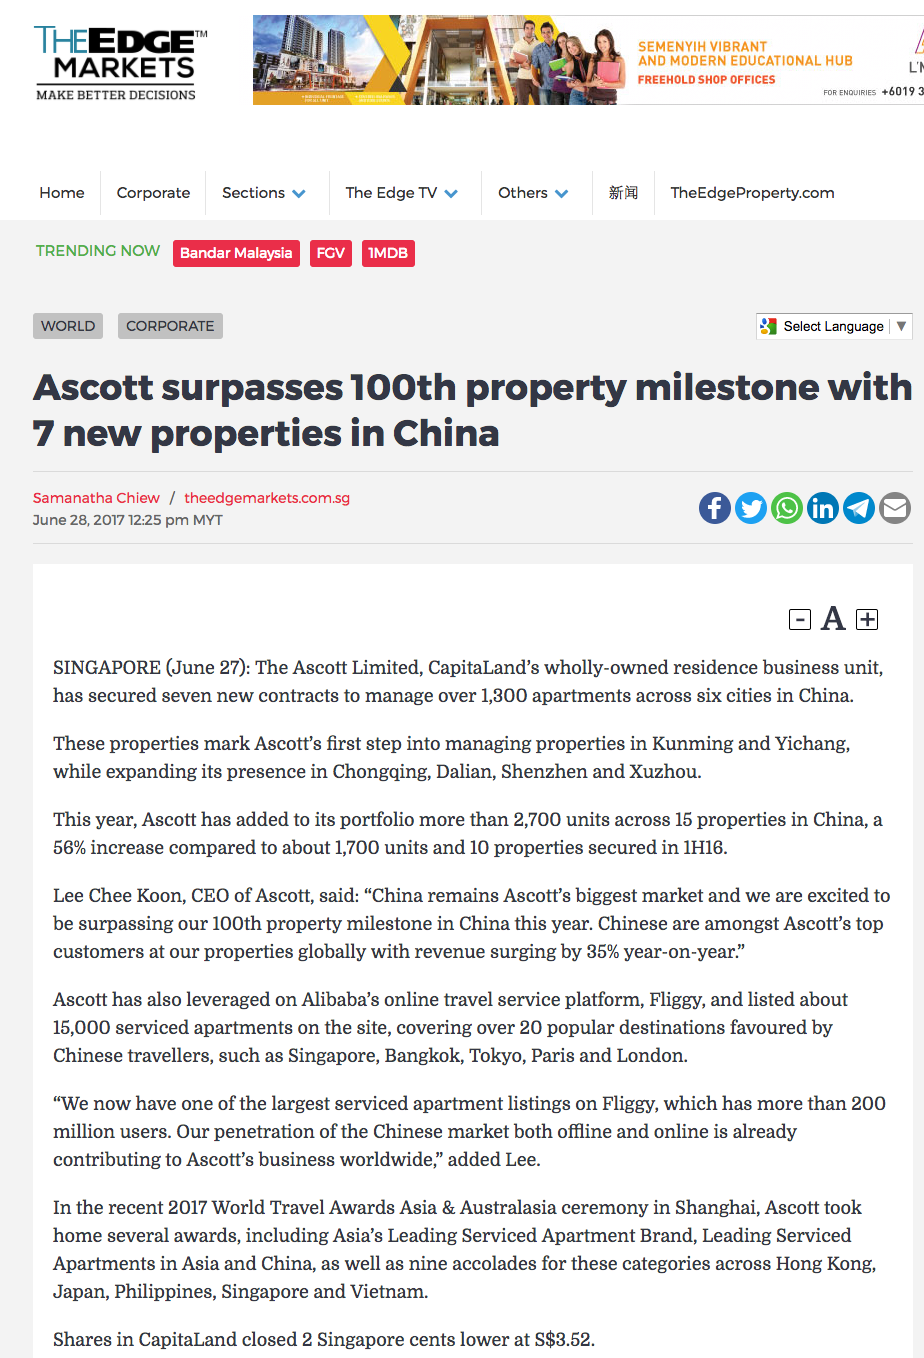 Ascott surpasses 100th property milestone with 7 new properties in China